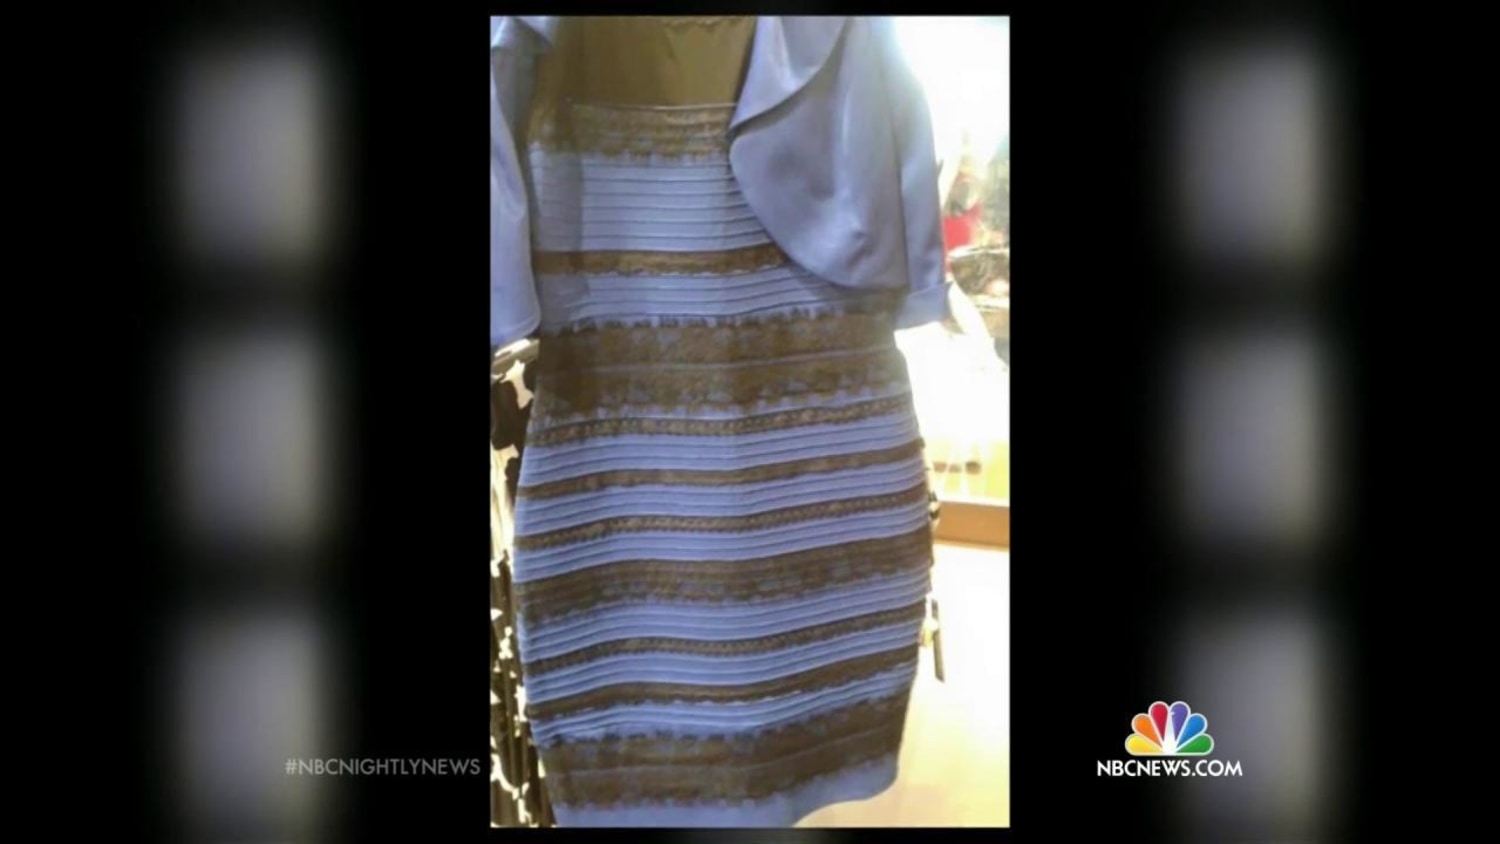 blue and gold dress illusion